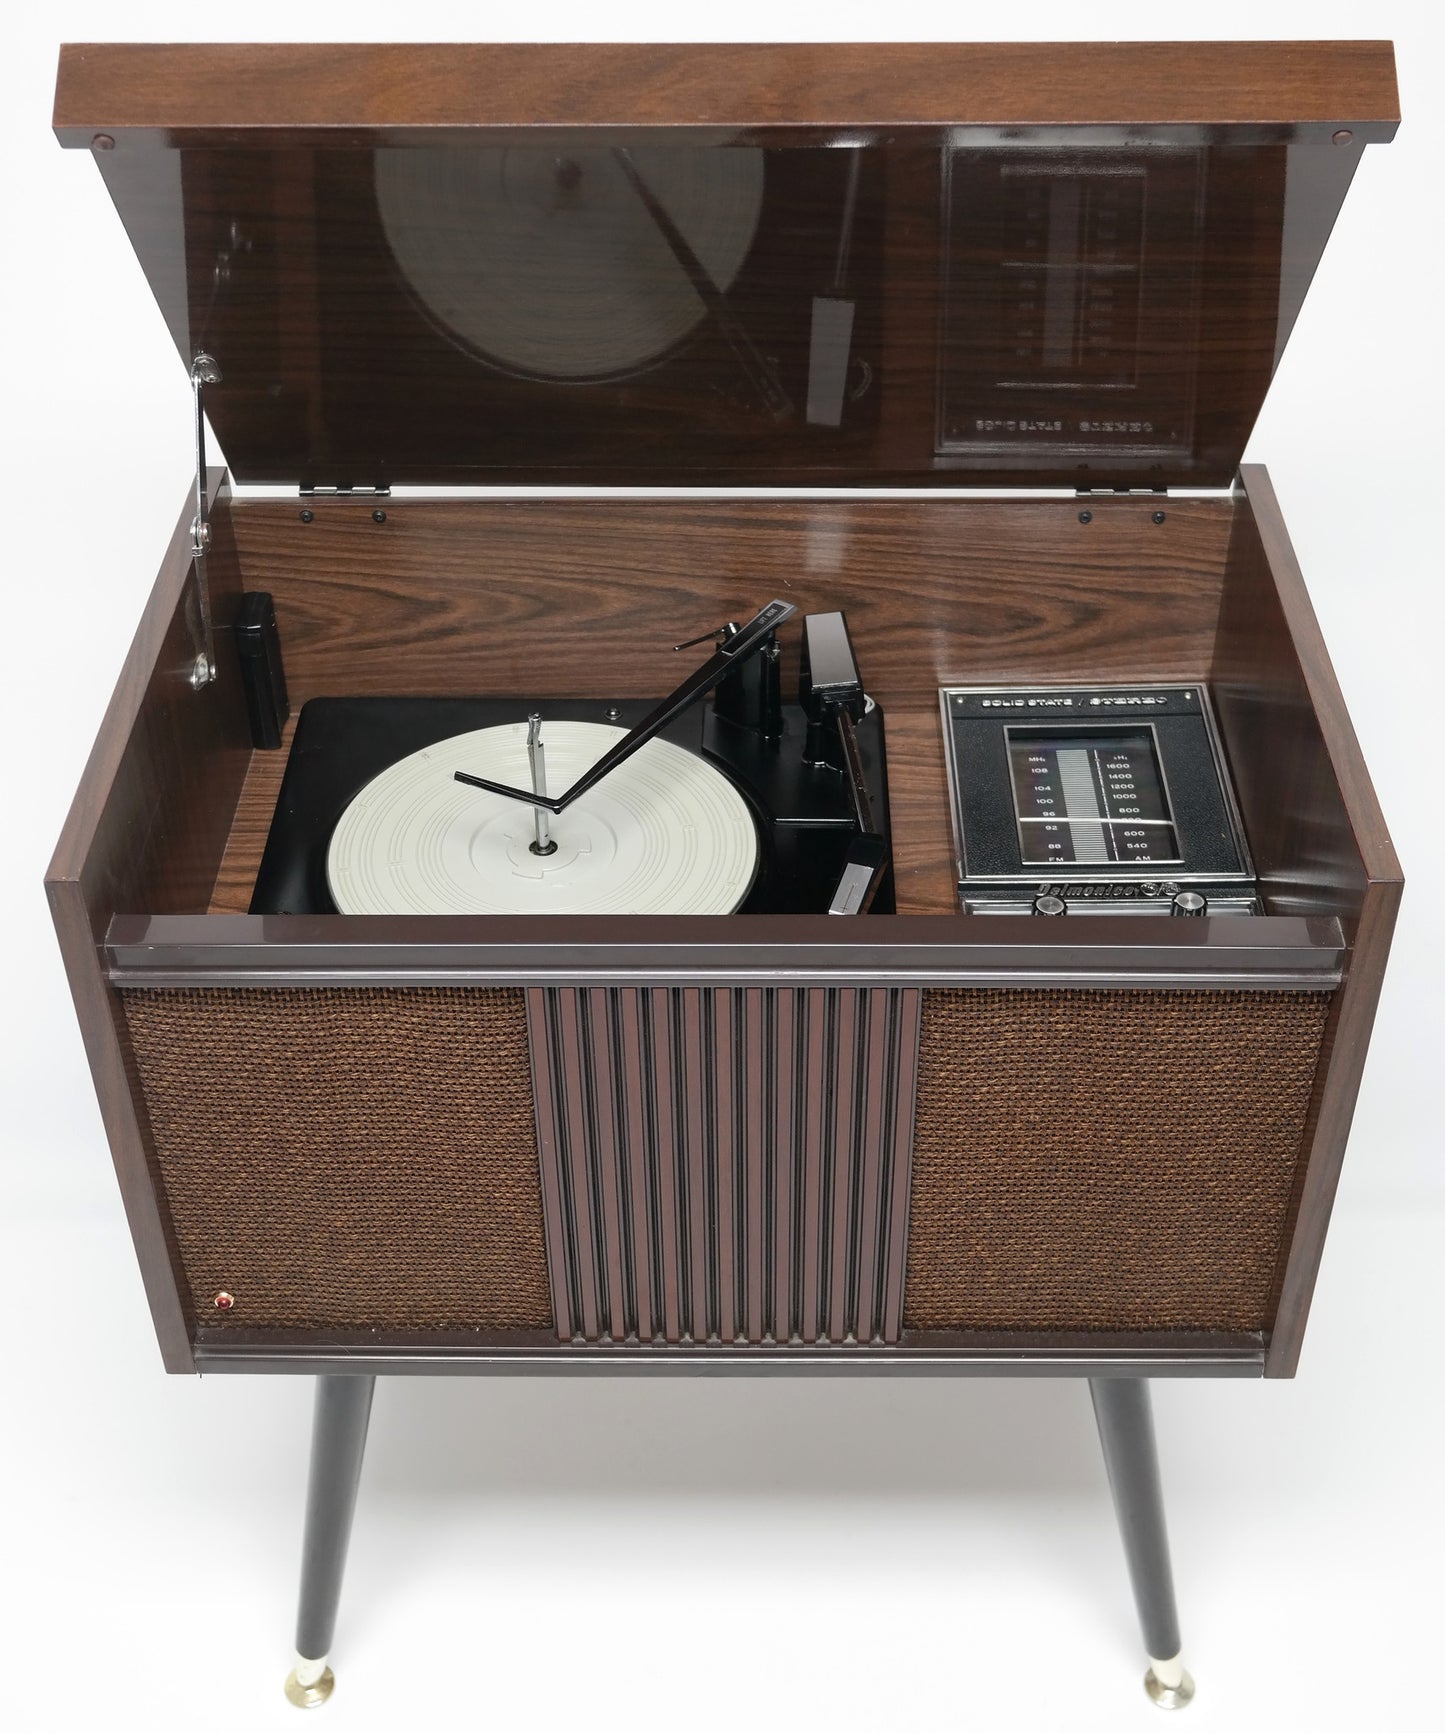 MCM STEREO - 60's Mid Century Delmonico Nivico Consolette Record Player - Bluetooth iPod iPhone Android Input AM/FM Tuner The Vintedge Co.